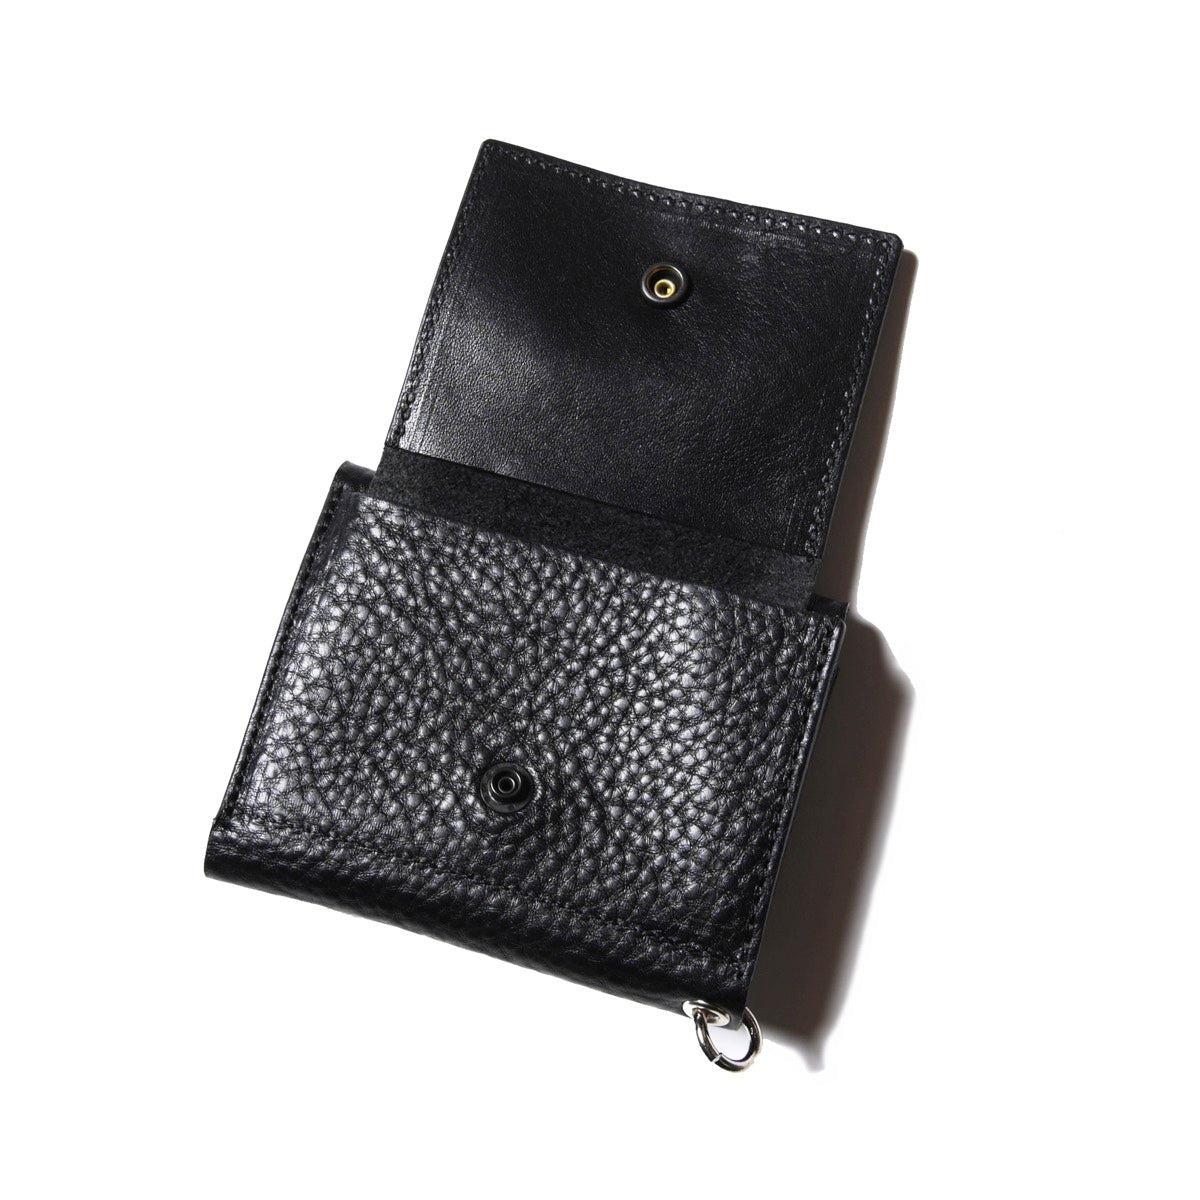 STUDS LEATHER MULTI WALLET